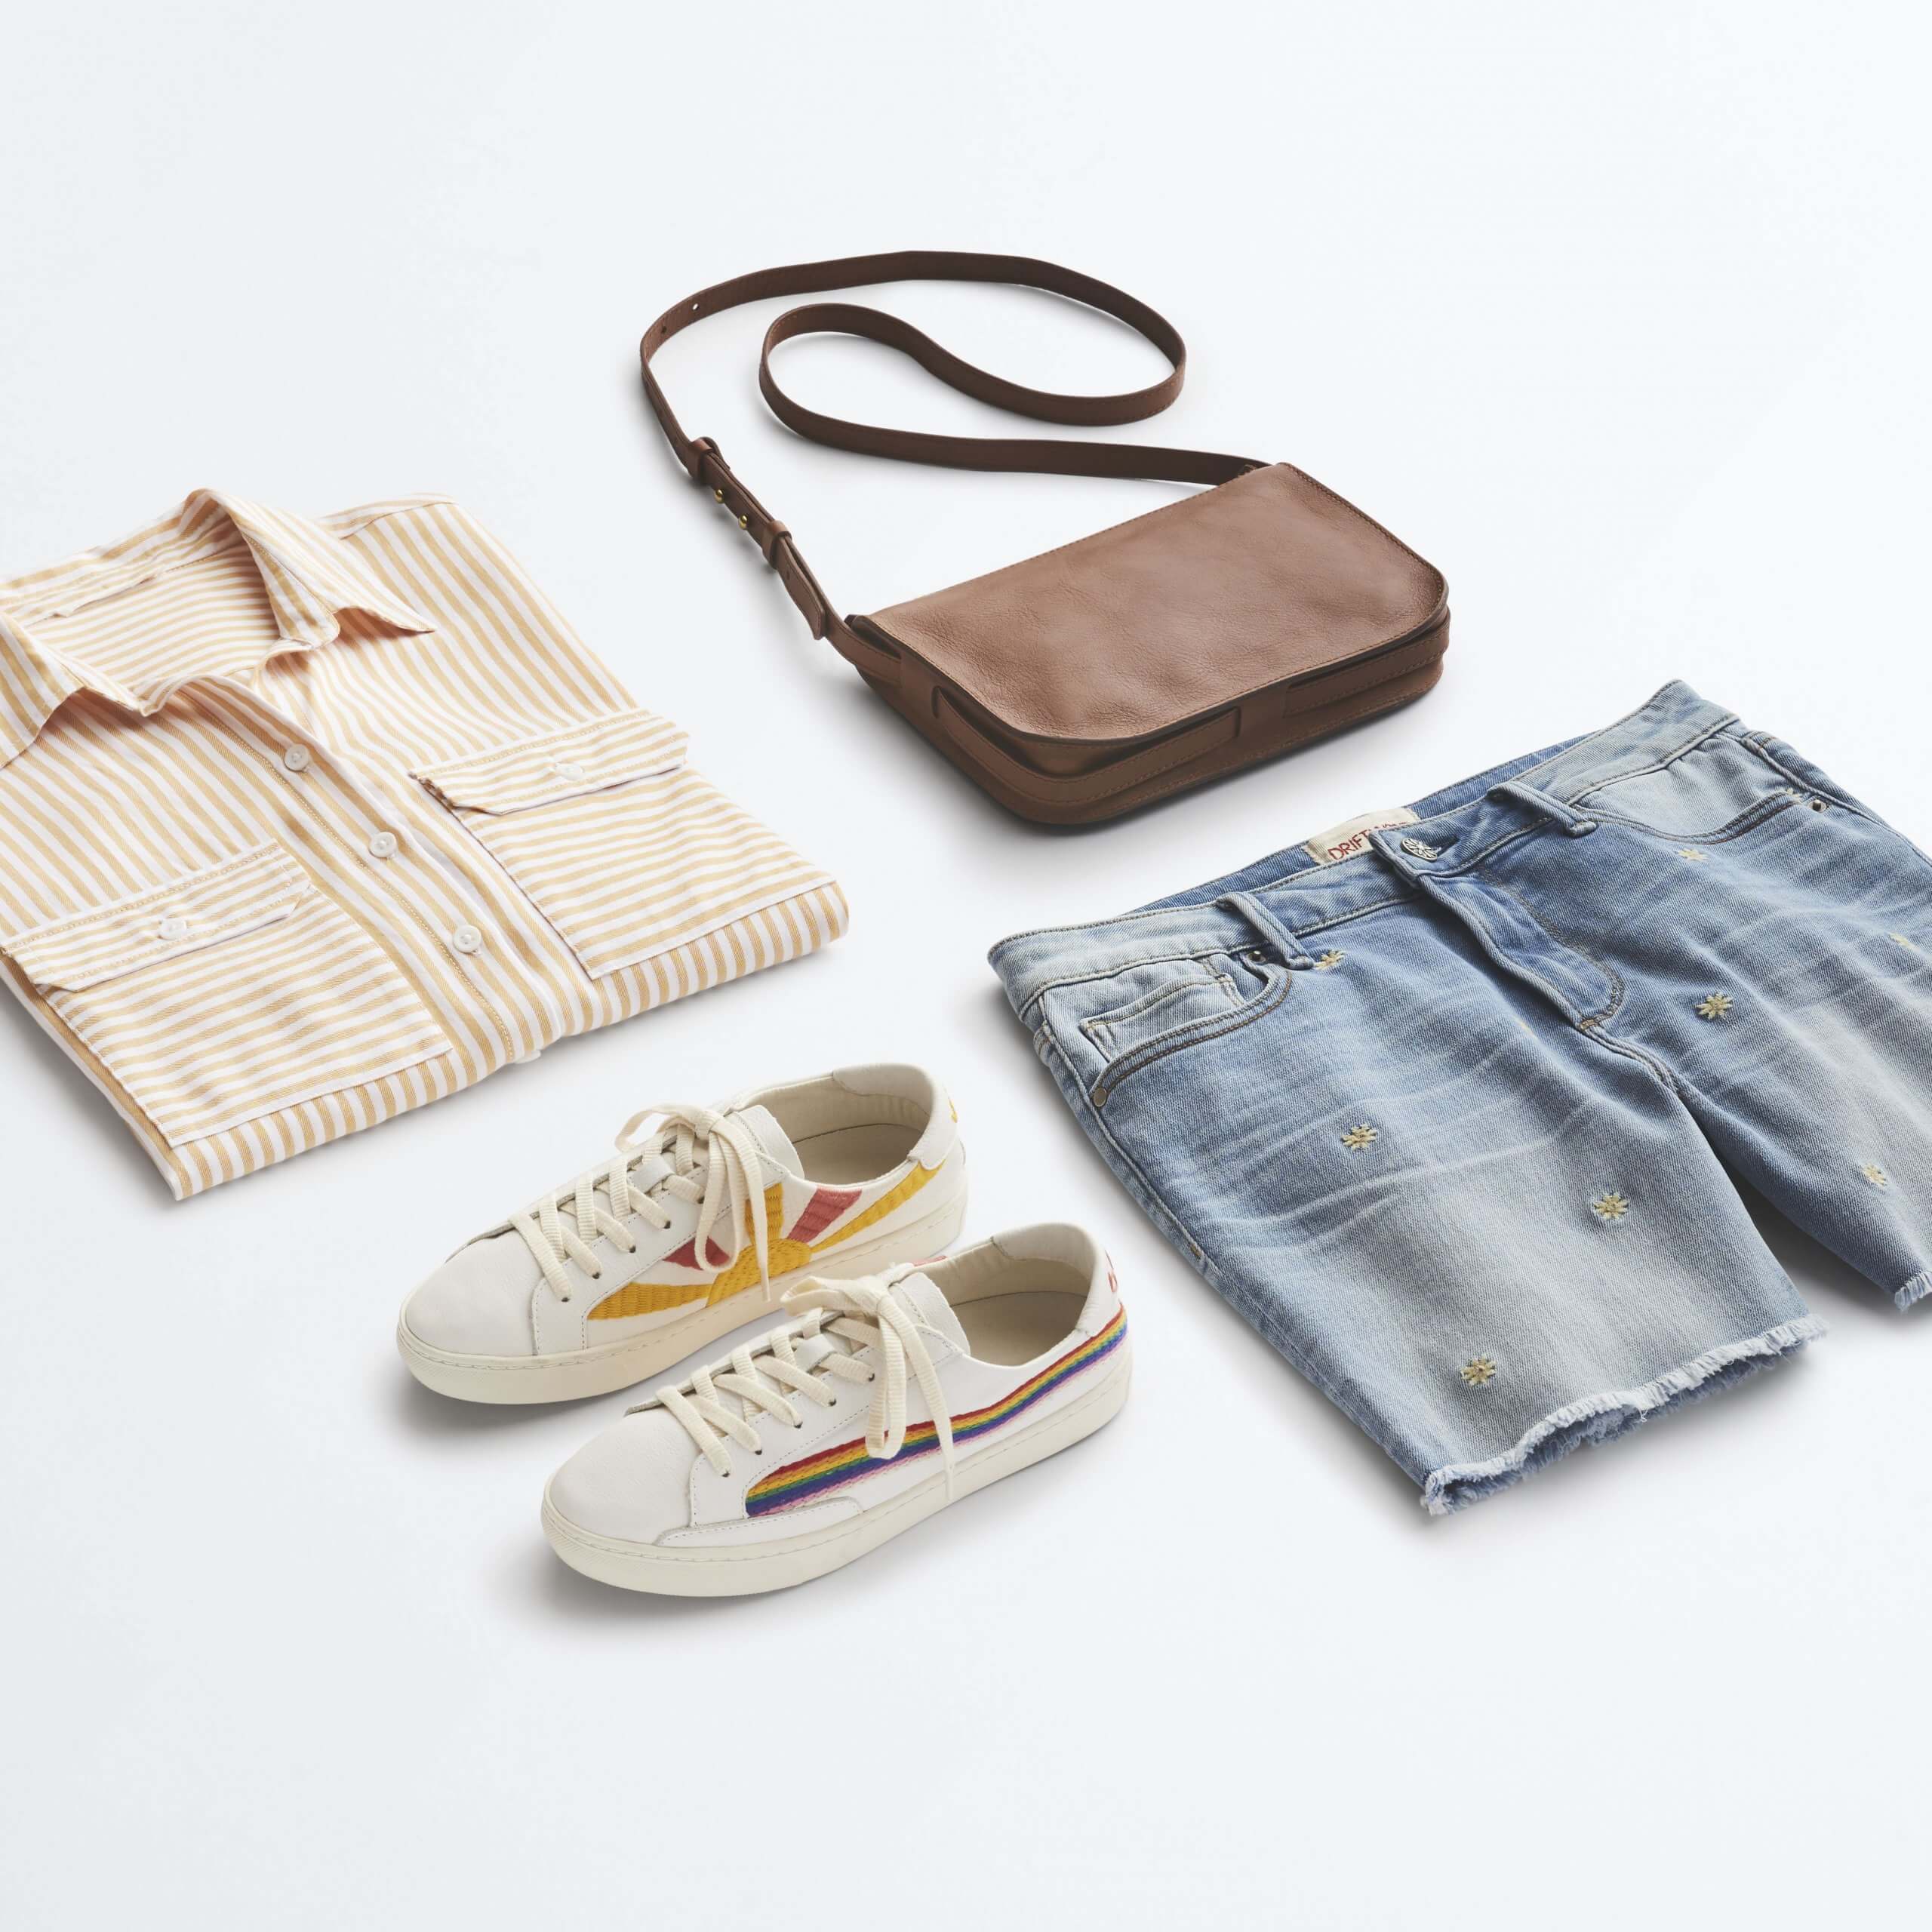 Stitch Fix Women's outfit laydown featuring cream striped button-down shirt, cut-off denim shorts, white sneakers with rainbow stripe and brown crossbody bag. 